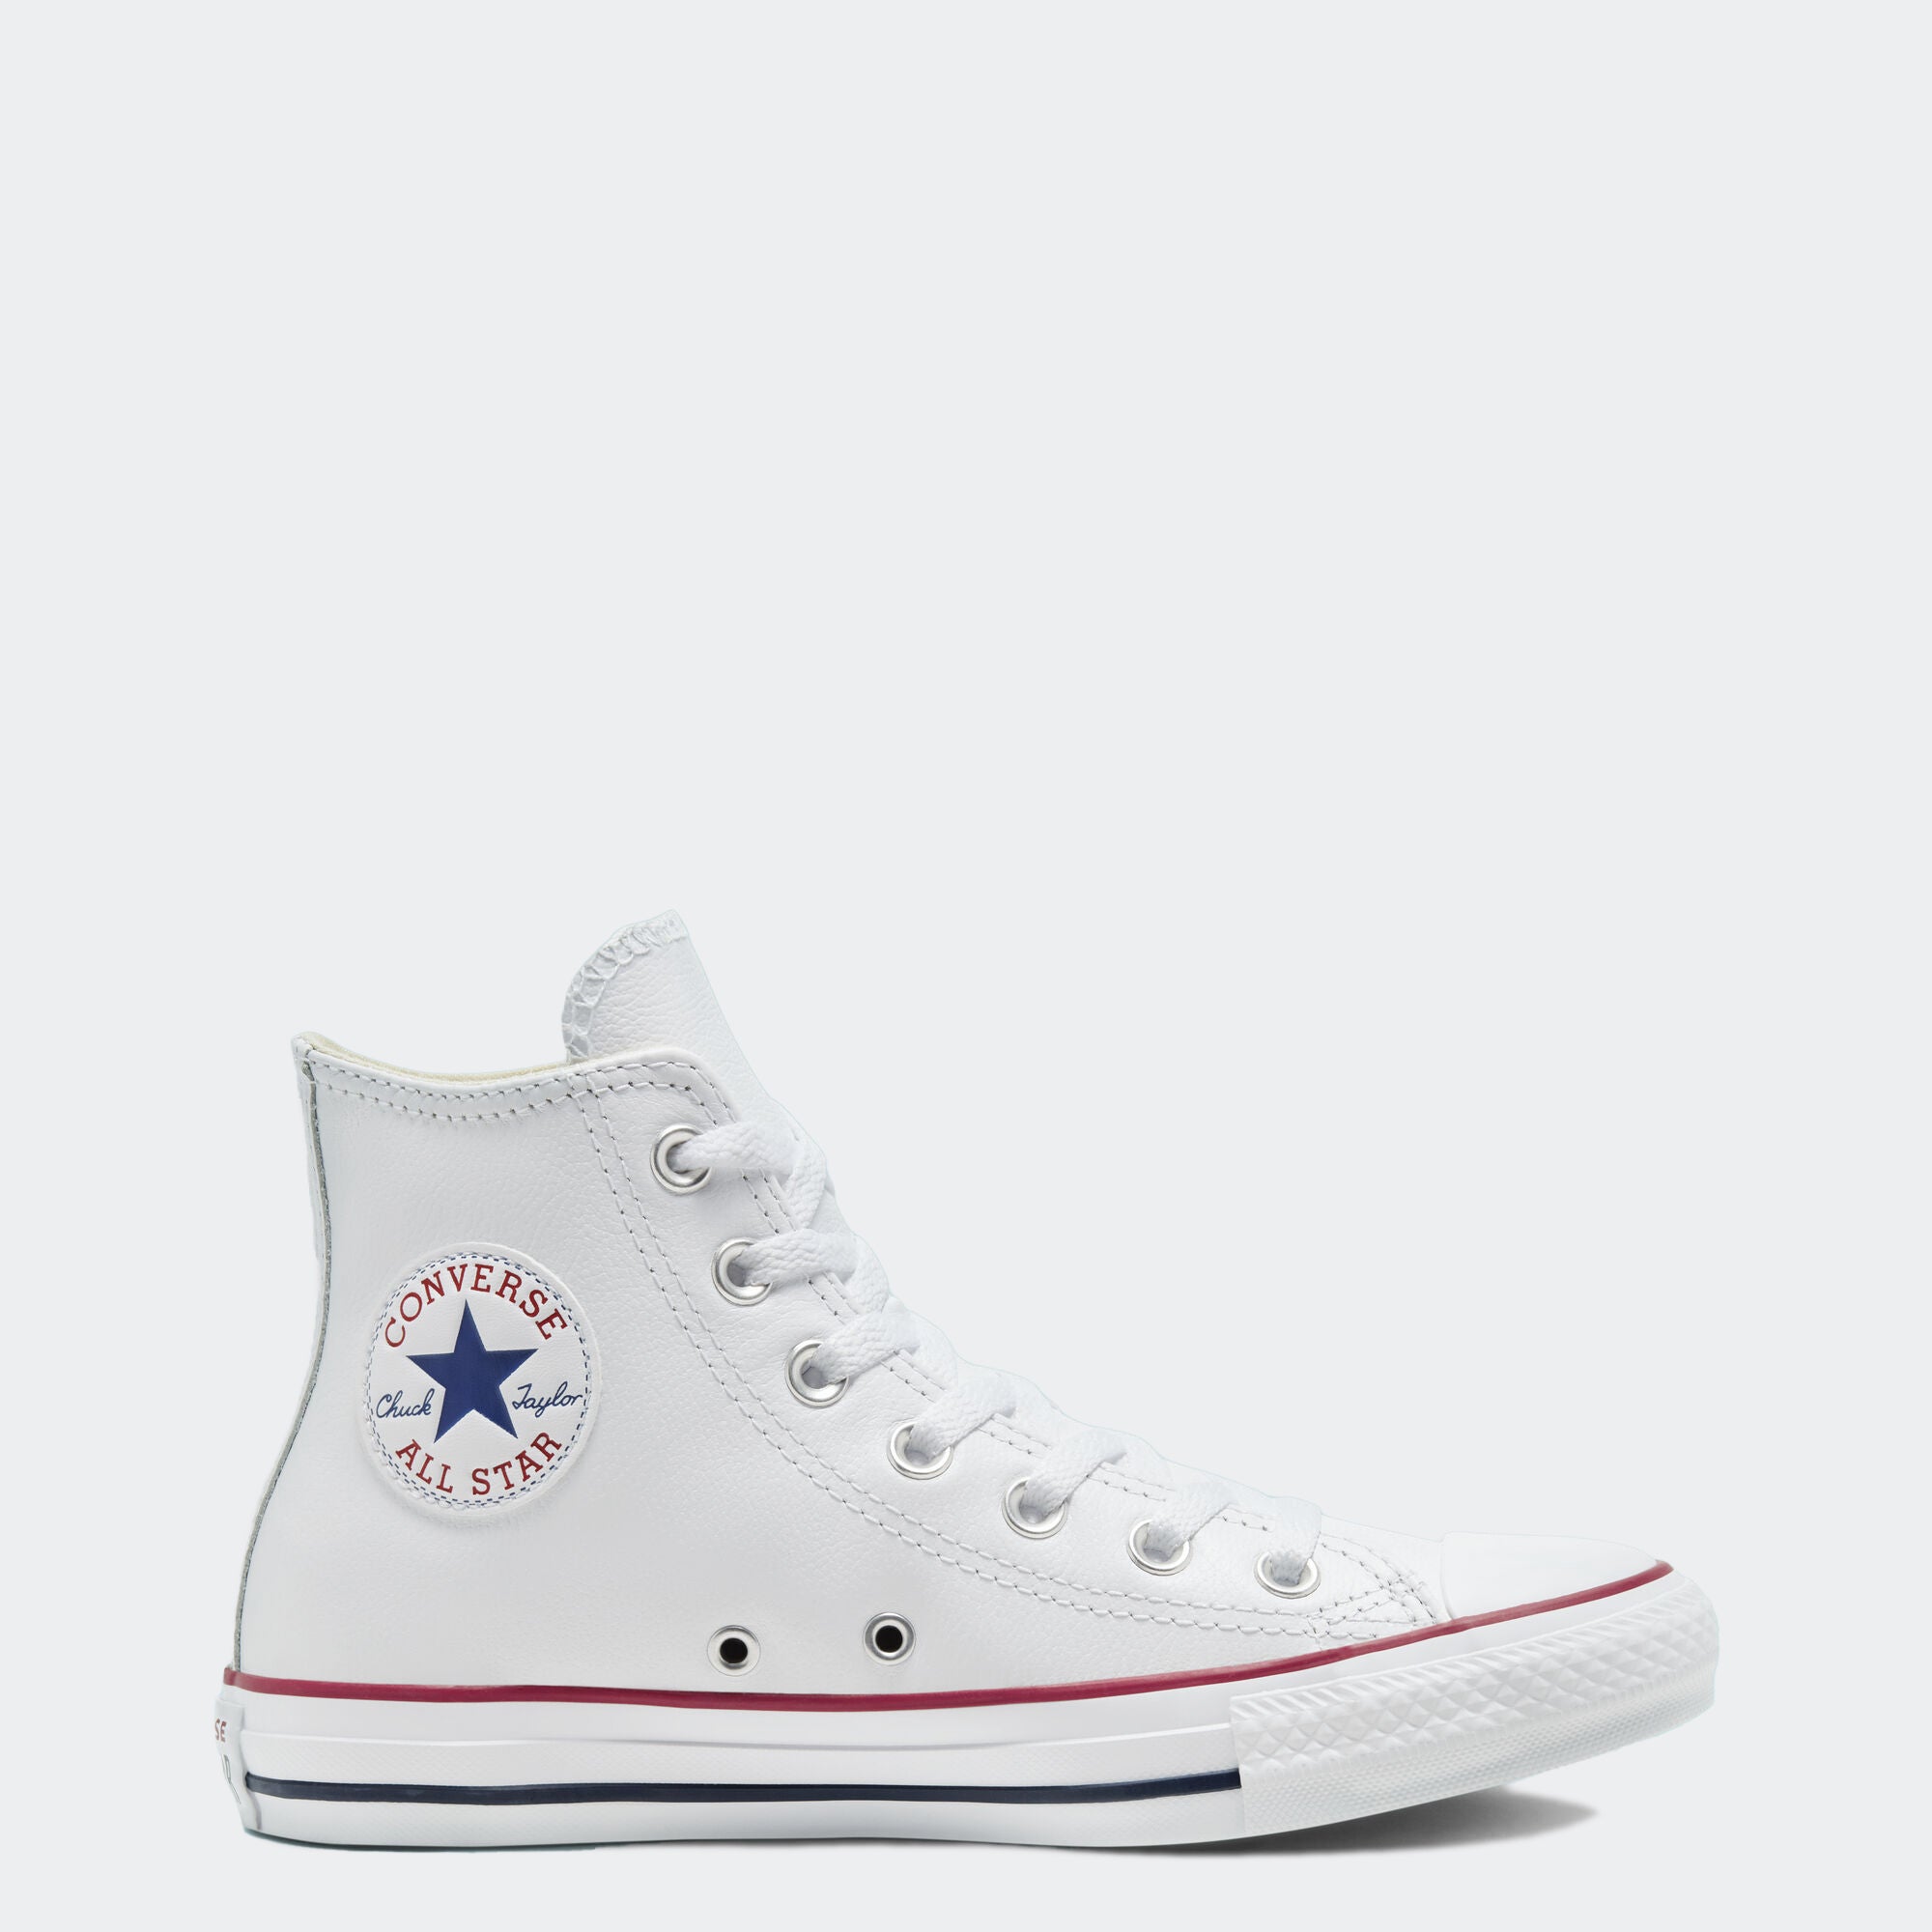 Converse Chuck Taylor Star High Shoes | Chicago City Sports